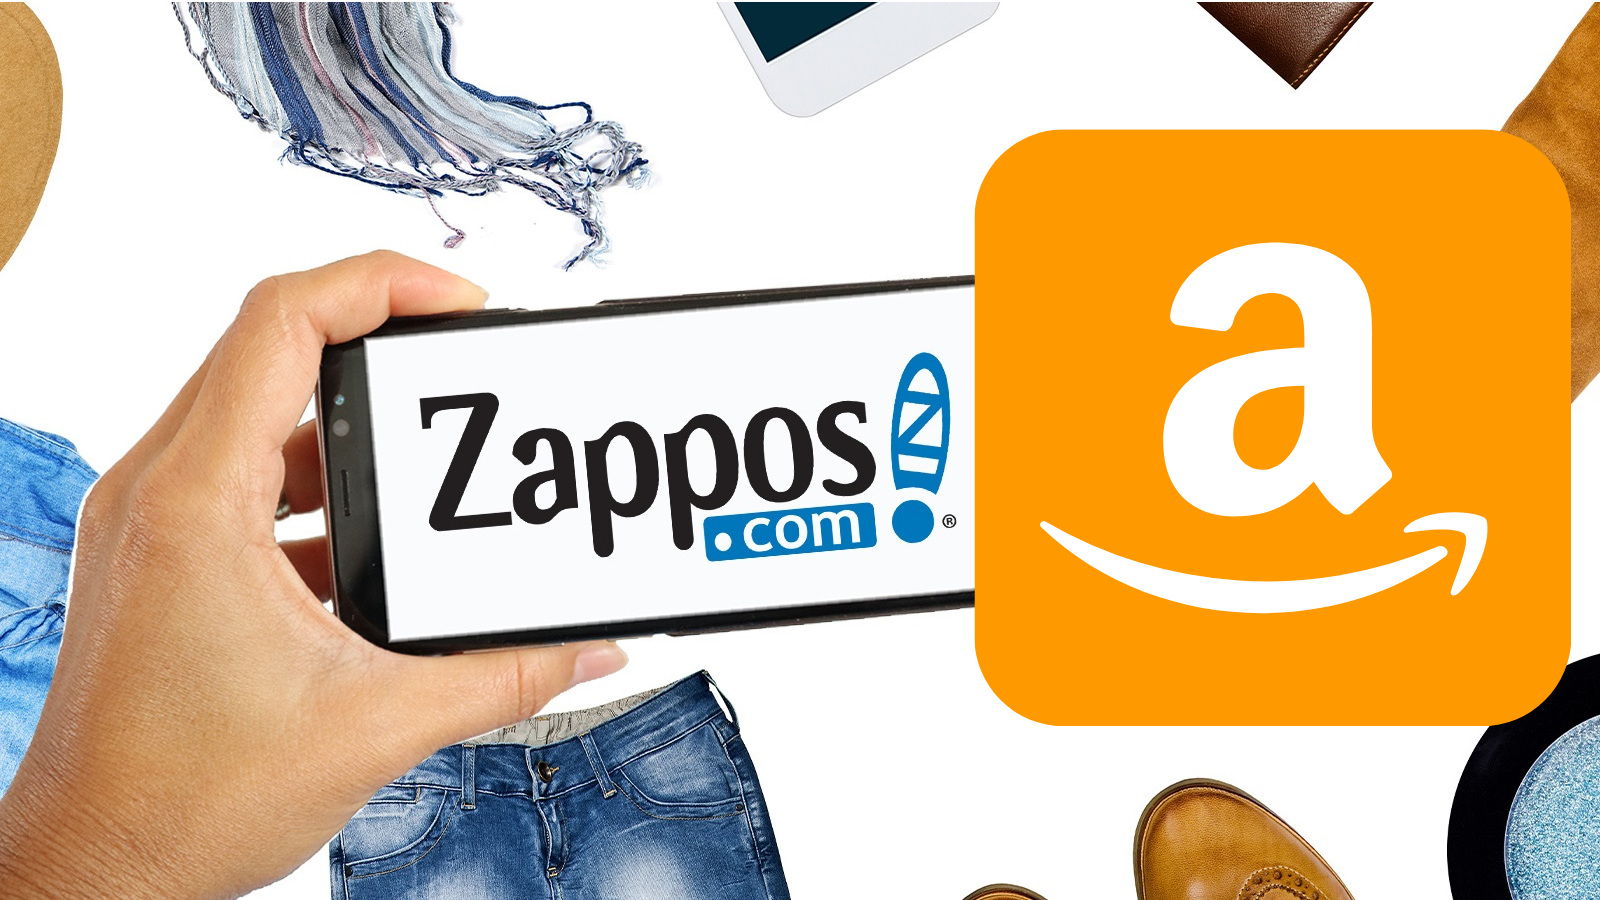 Does Amazon Own Zappos? (Here Is The Real Truth)